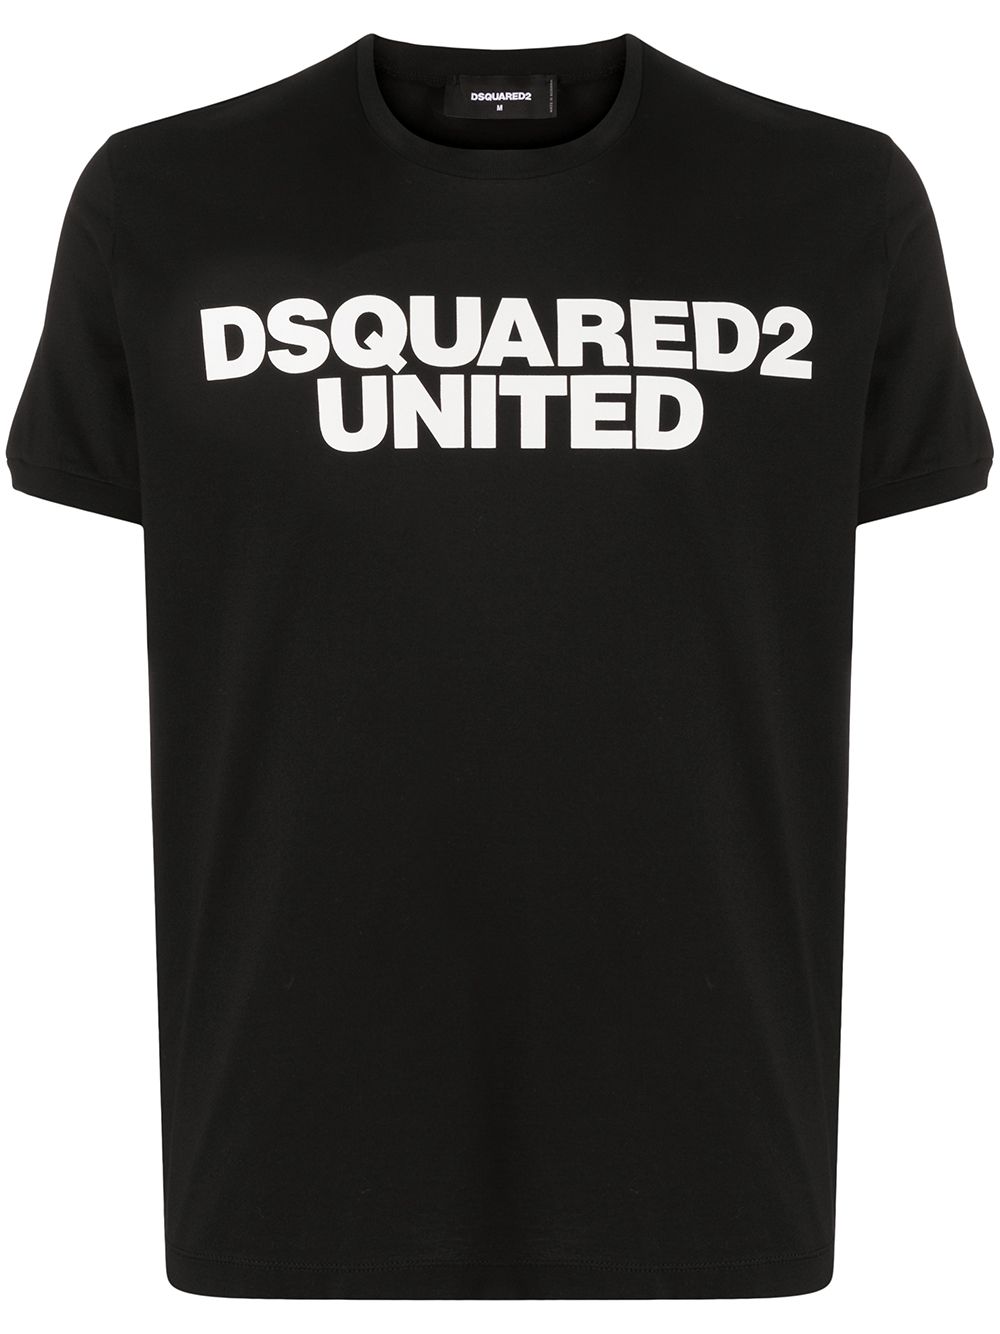 how do dsquared t shirts fit